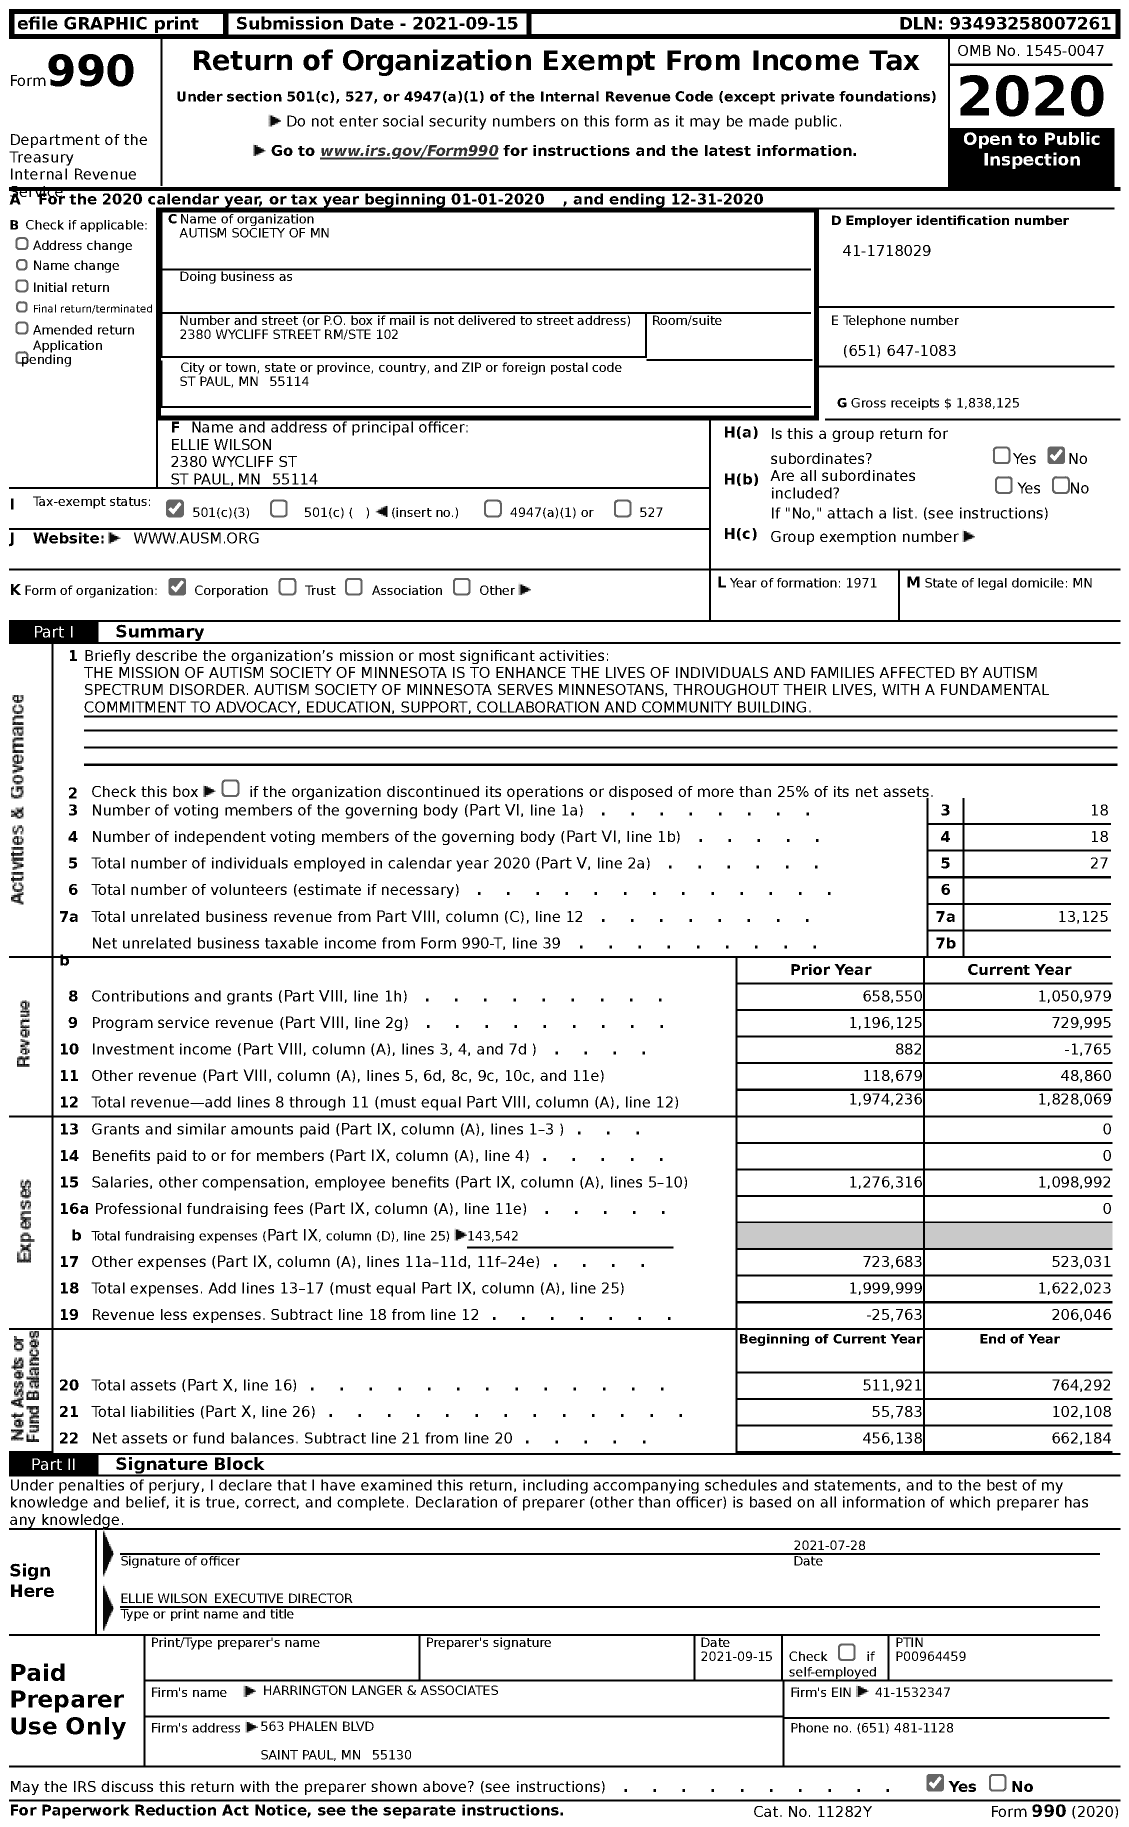 Image of first page of 2020 Form 990 for Autism Society of Minnesota (ASM)